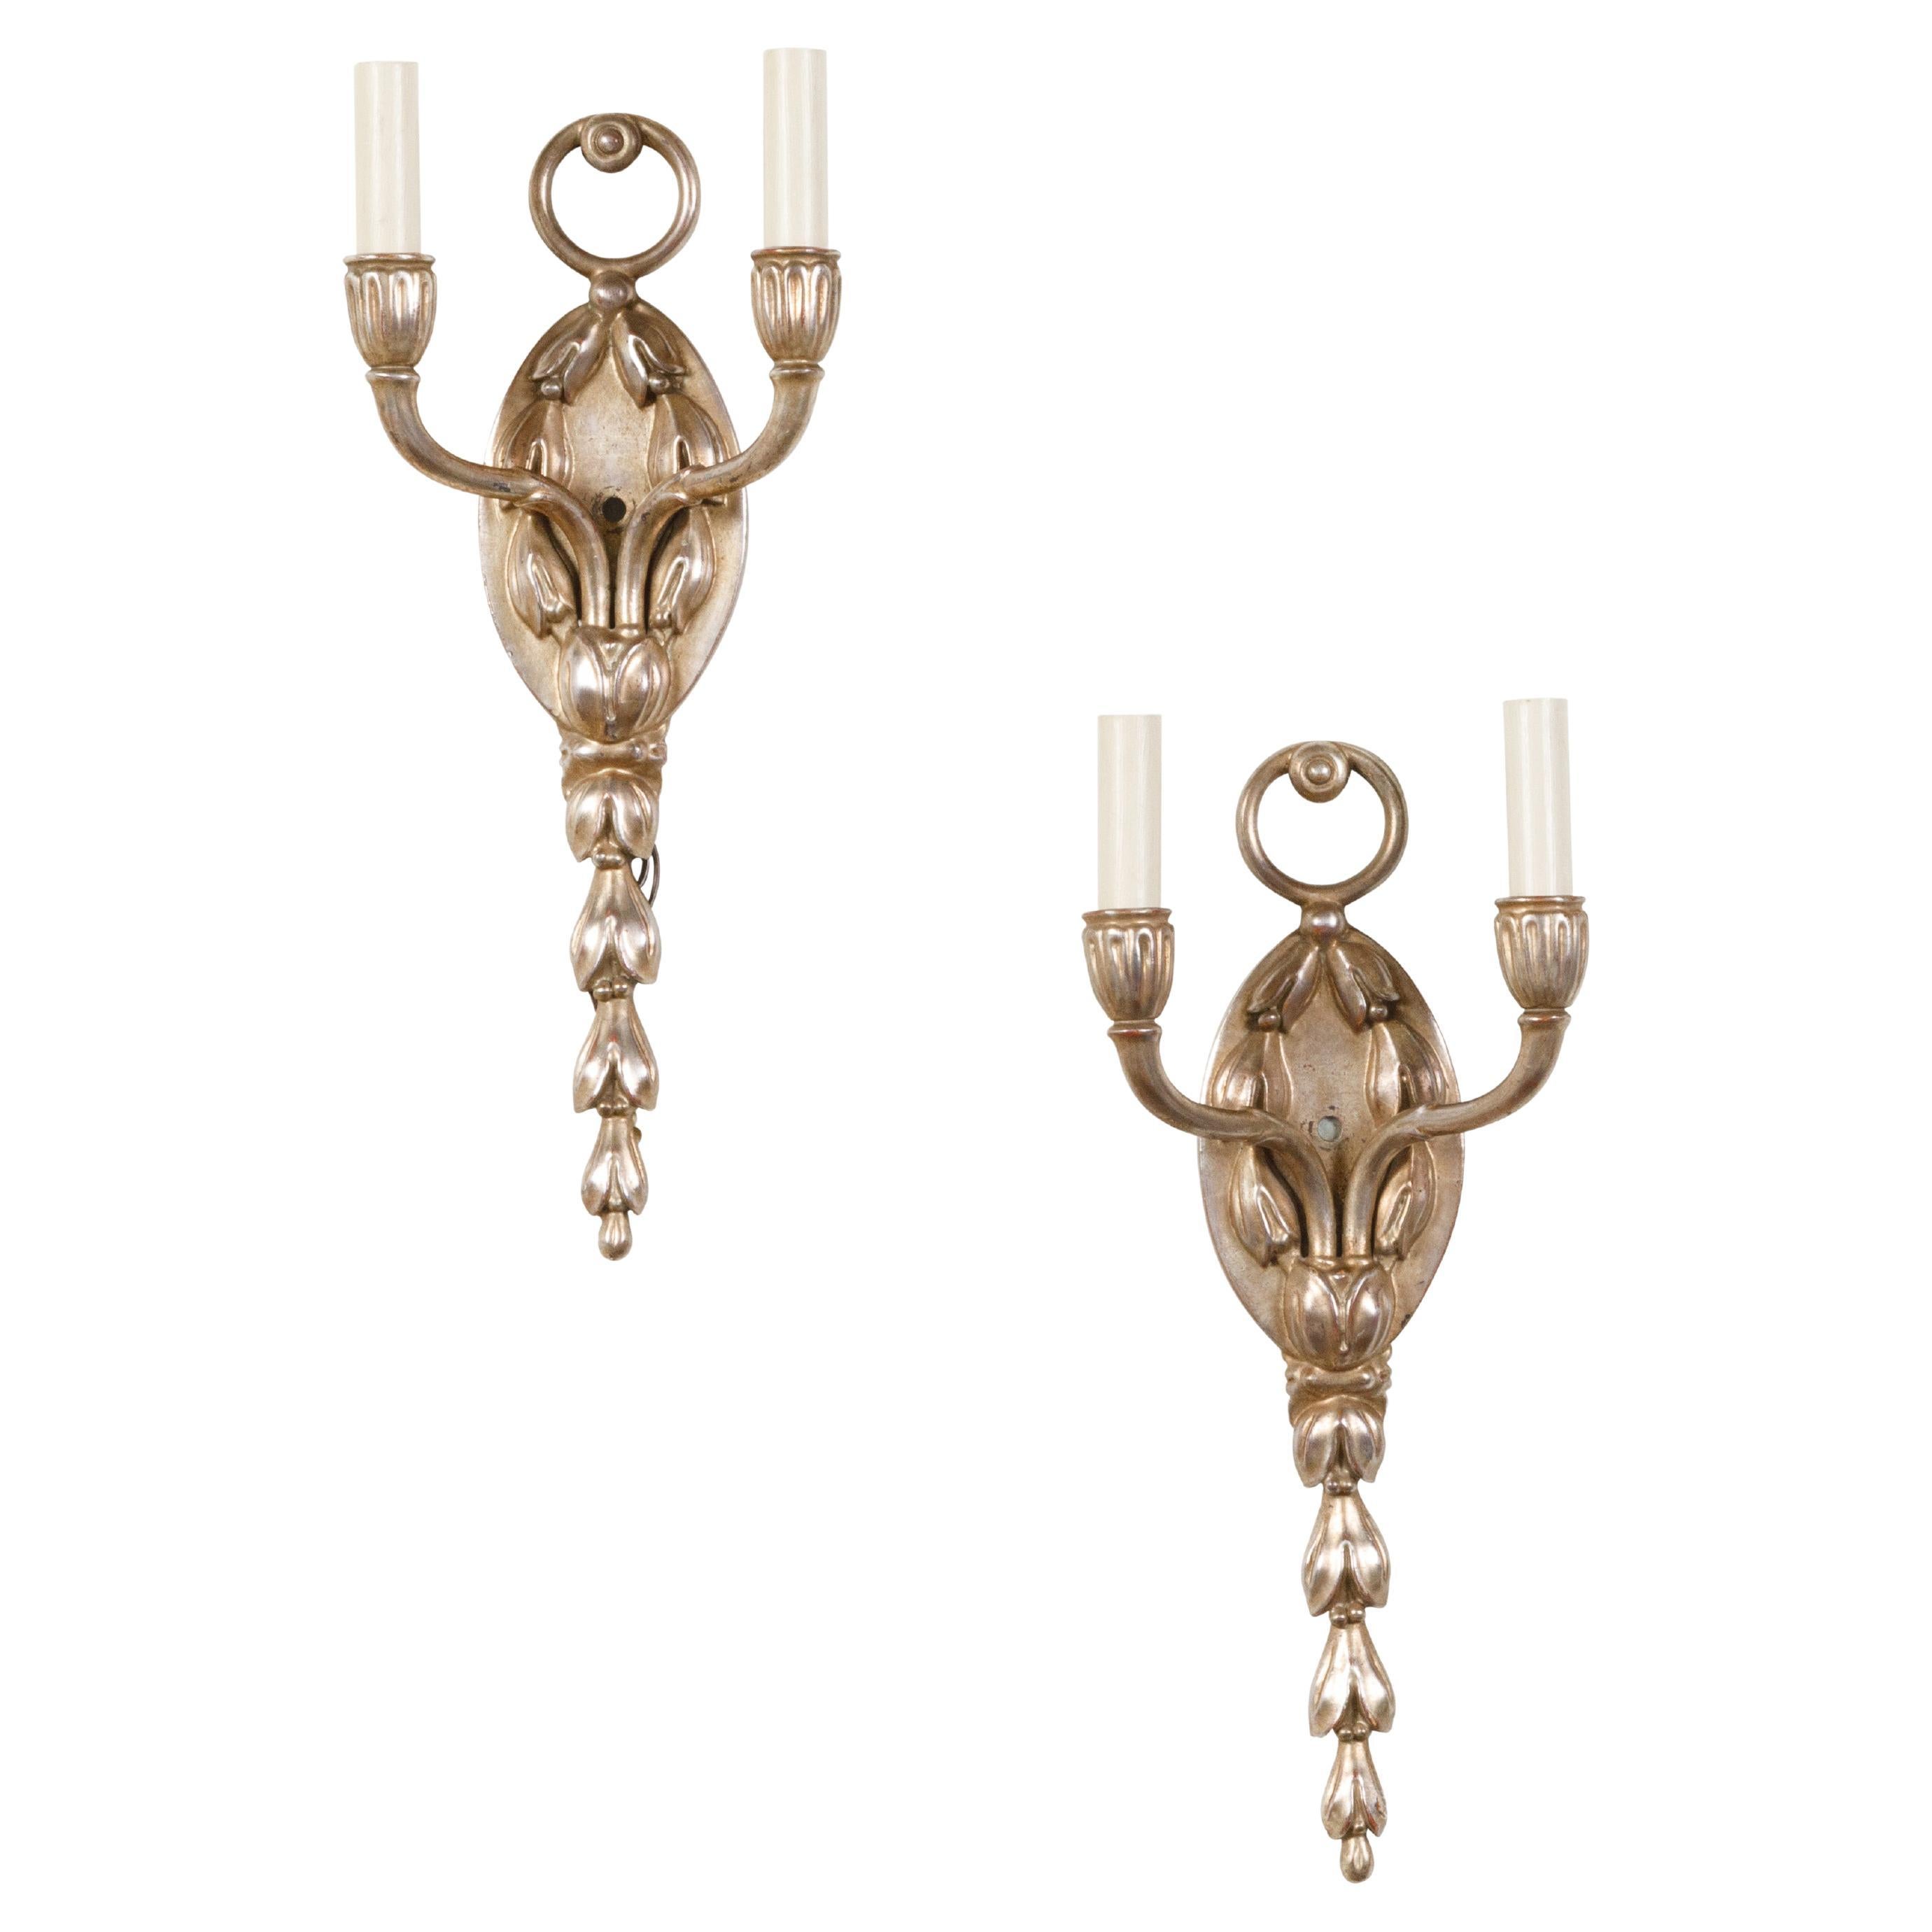 Pair of English Midcentury Silver Plated Two-Light Wall Sconces with Foliage For Sale